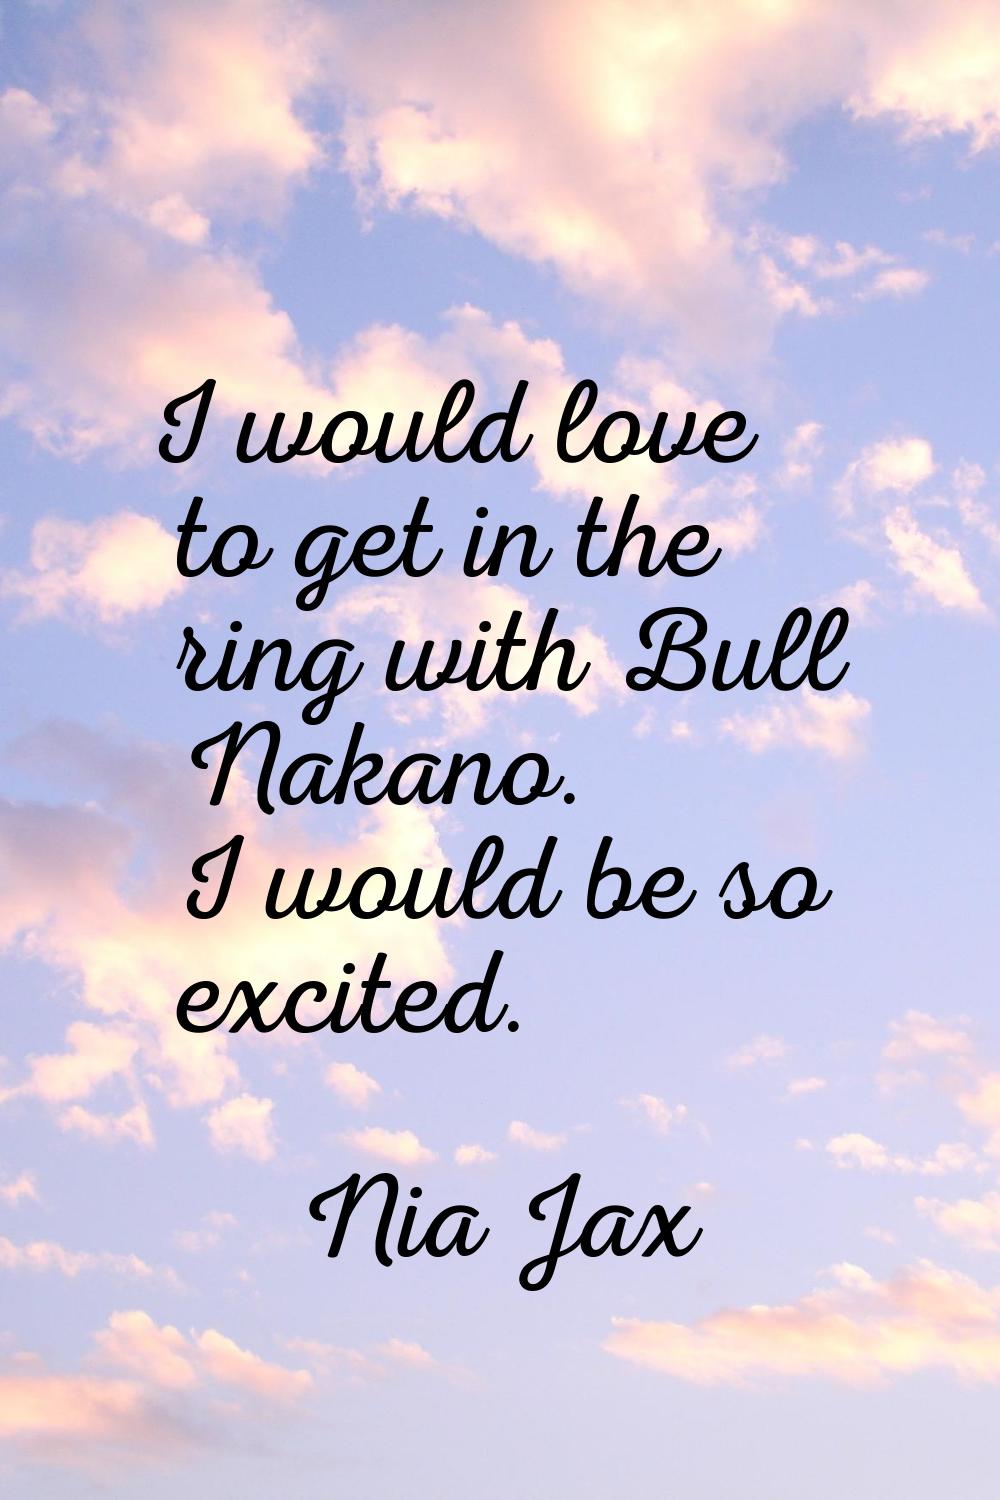 I would love to get in the ring with Bull Nakano. I would be so excited.